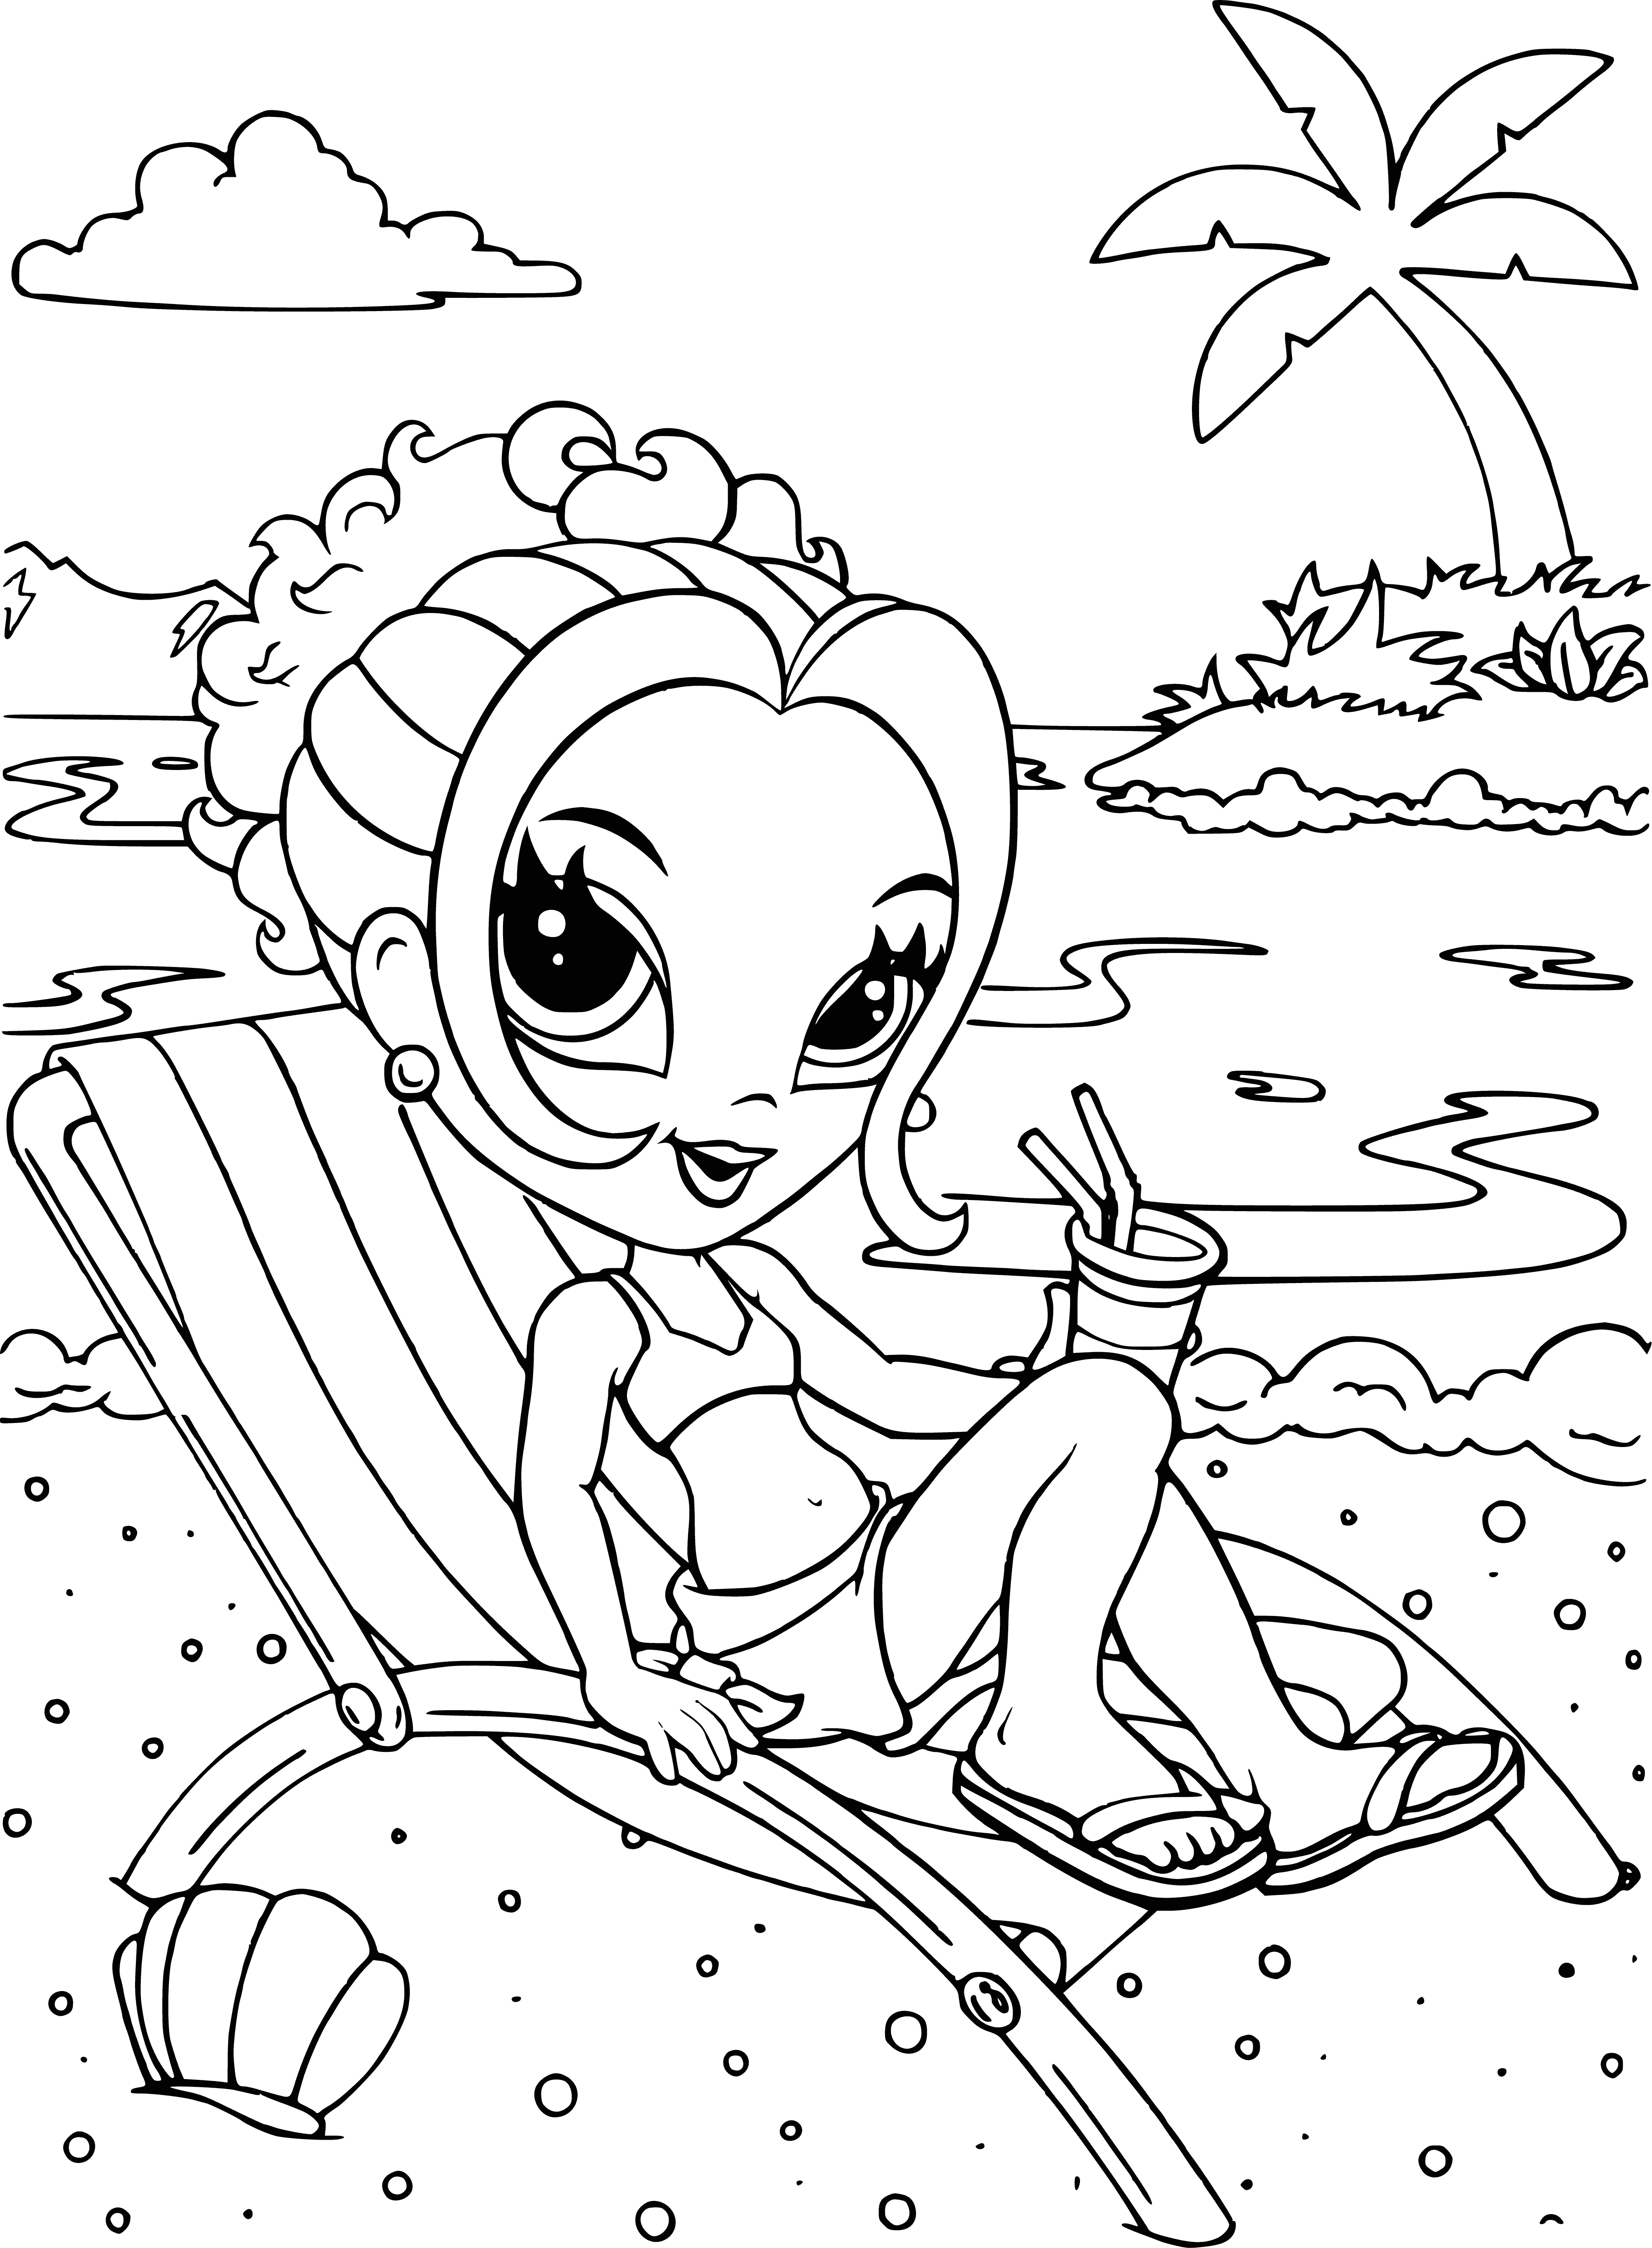 coloring page: Glamorous Lisa Frank girl: blonde hair, blue eyes, pink lips. Wearing white dress, black bowtie, furry stole. Holding parasol, tiara, standing in front of pink/black butterfly.